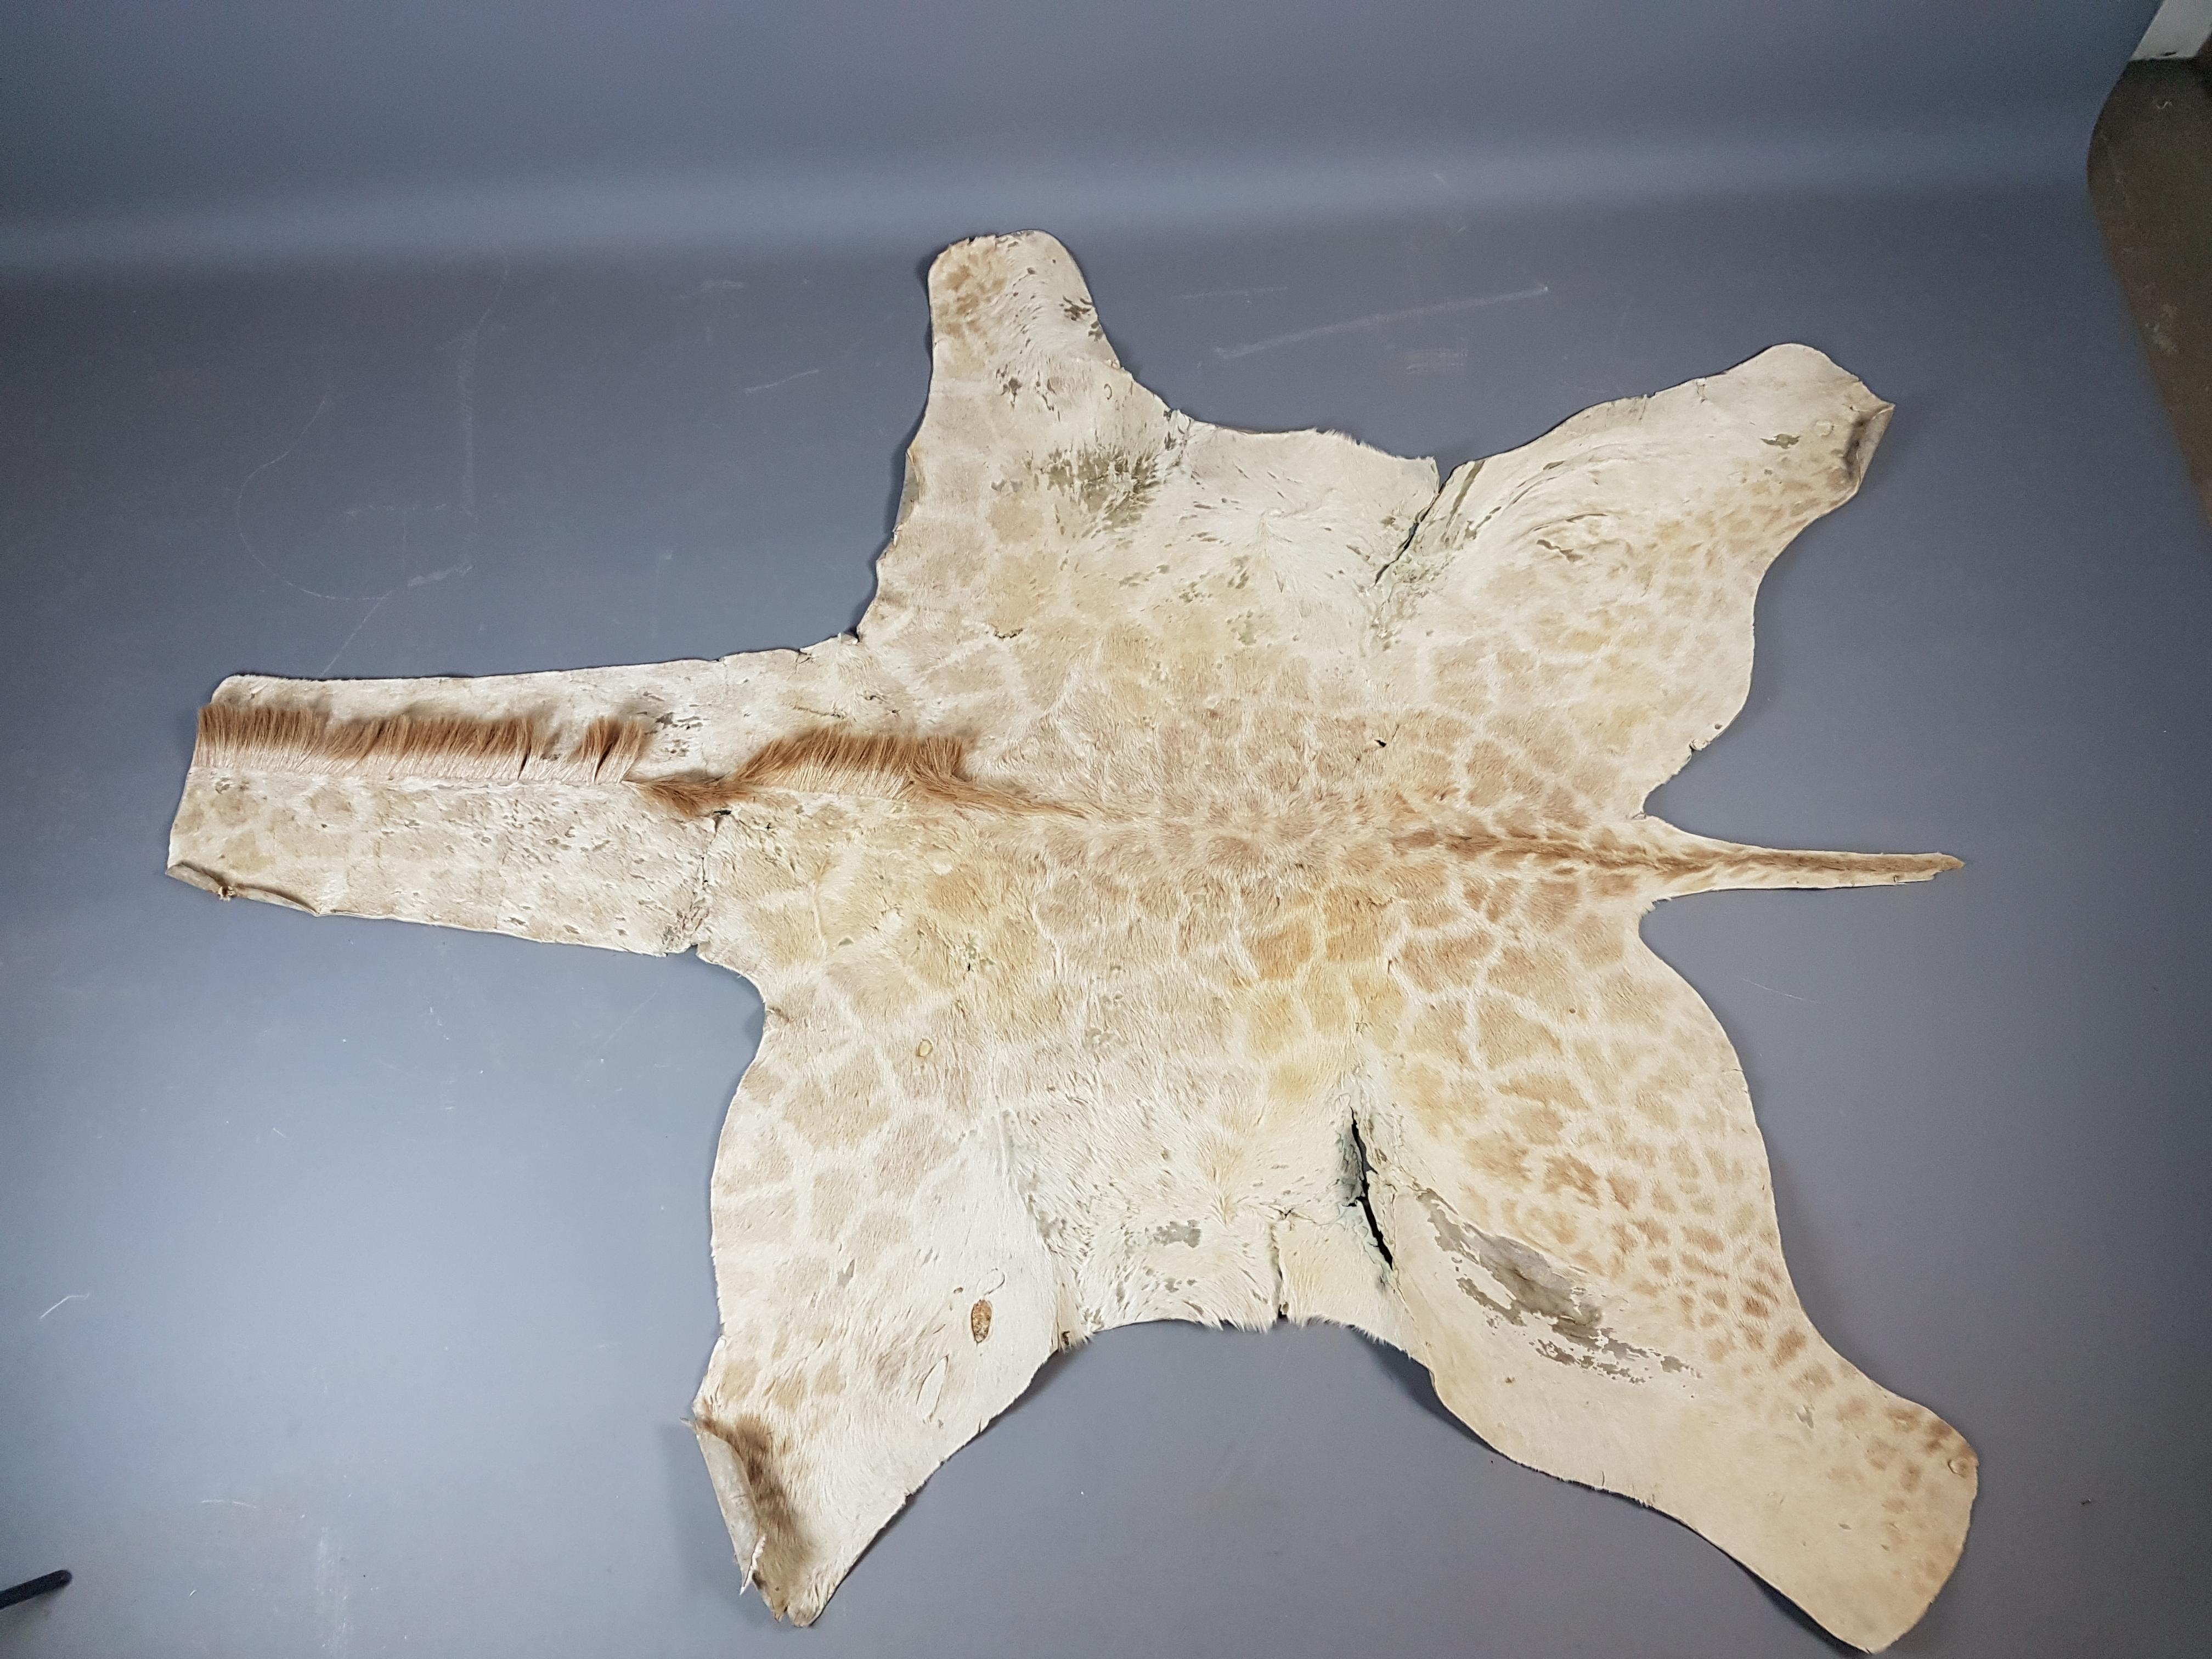 This is a nice country house juvenile giraffe skin rug / hide. It is in used condition with areas of wear and tear that comes with items like this, the color is still in good order with minimal fading. There are some tears around the edge that can